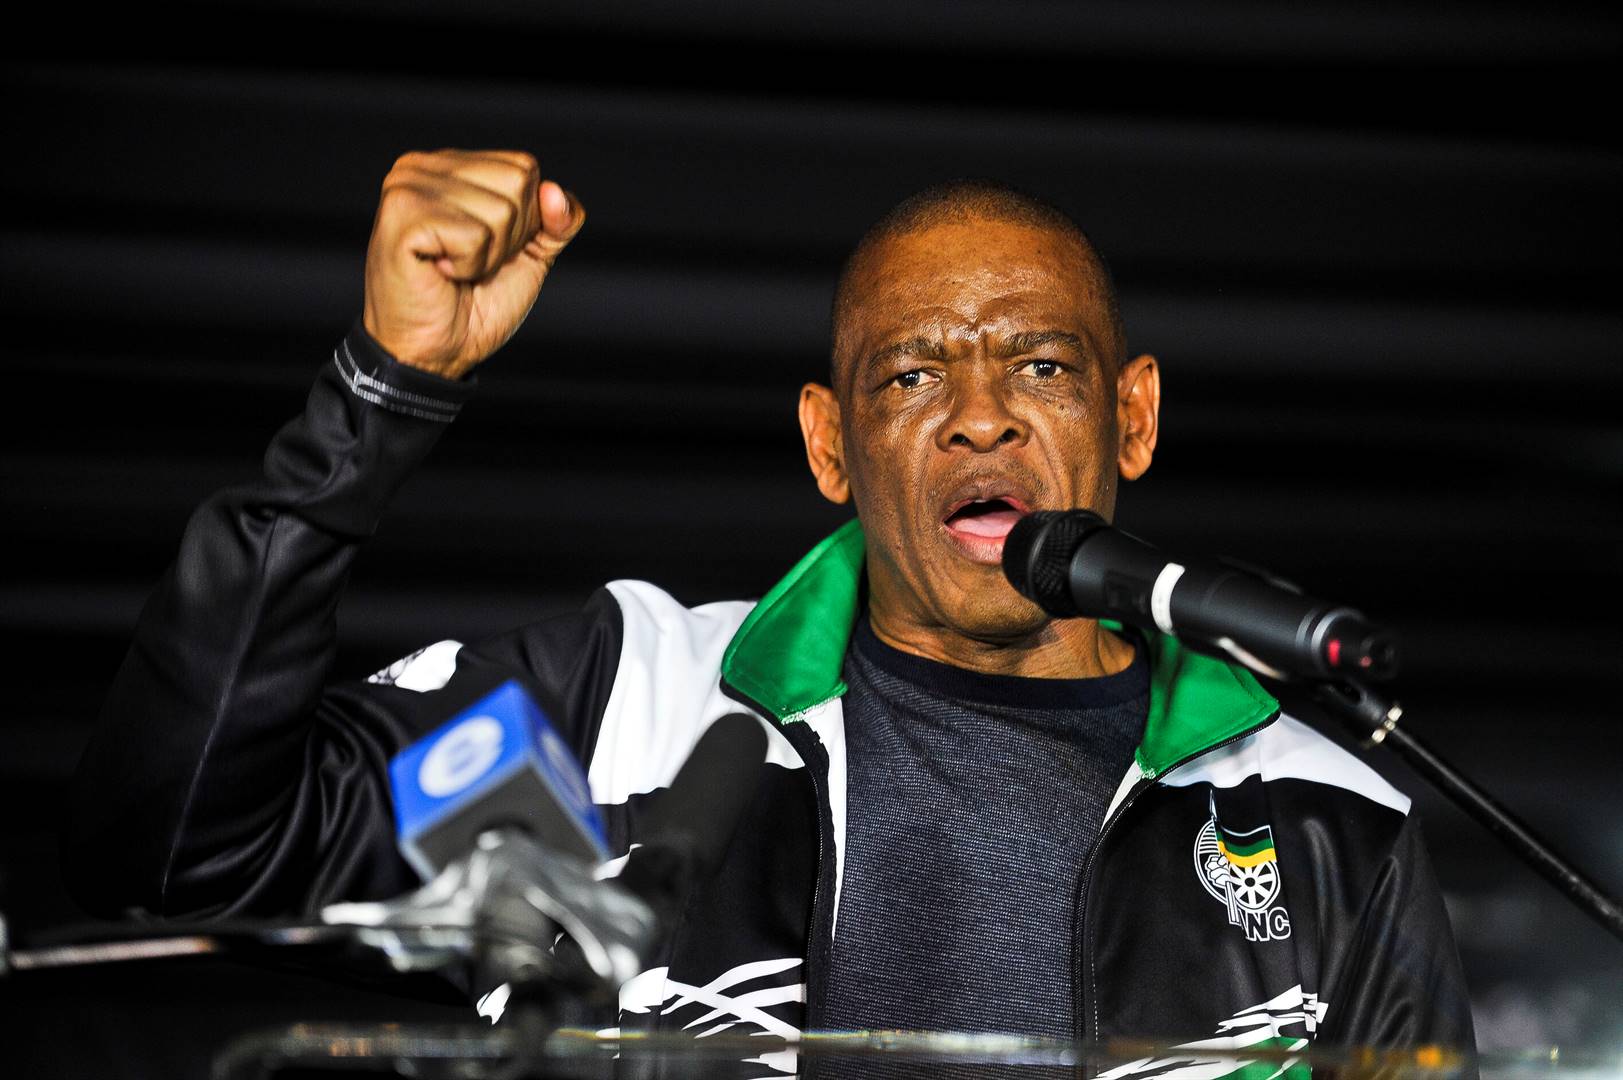 Magashule served papers to the governing party late this week in a bid to reverse his temporary removal from office and instead confirm his failed attempt to suspend President Cyril Ramaphosa. Photo: Rosetta Msimango